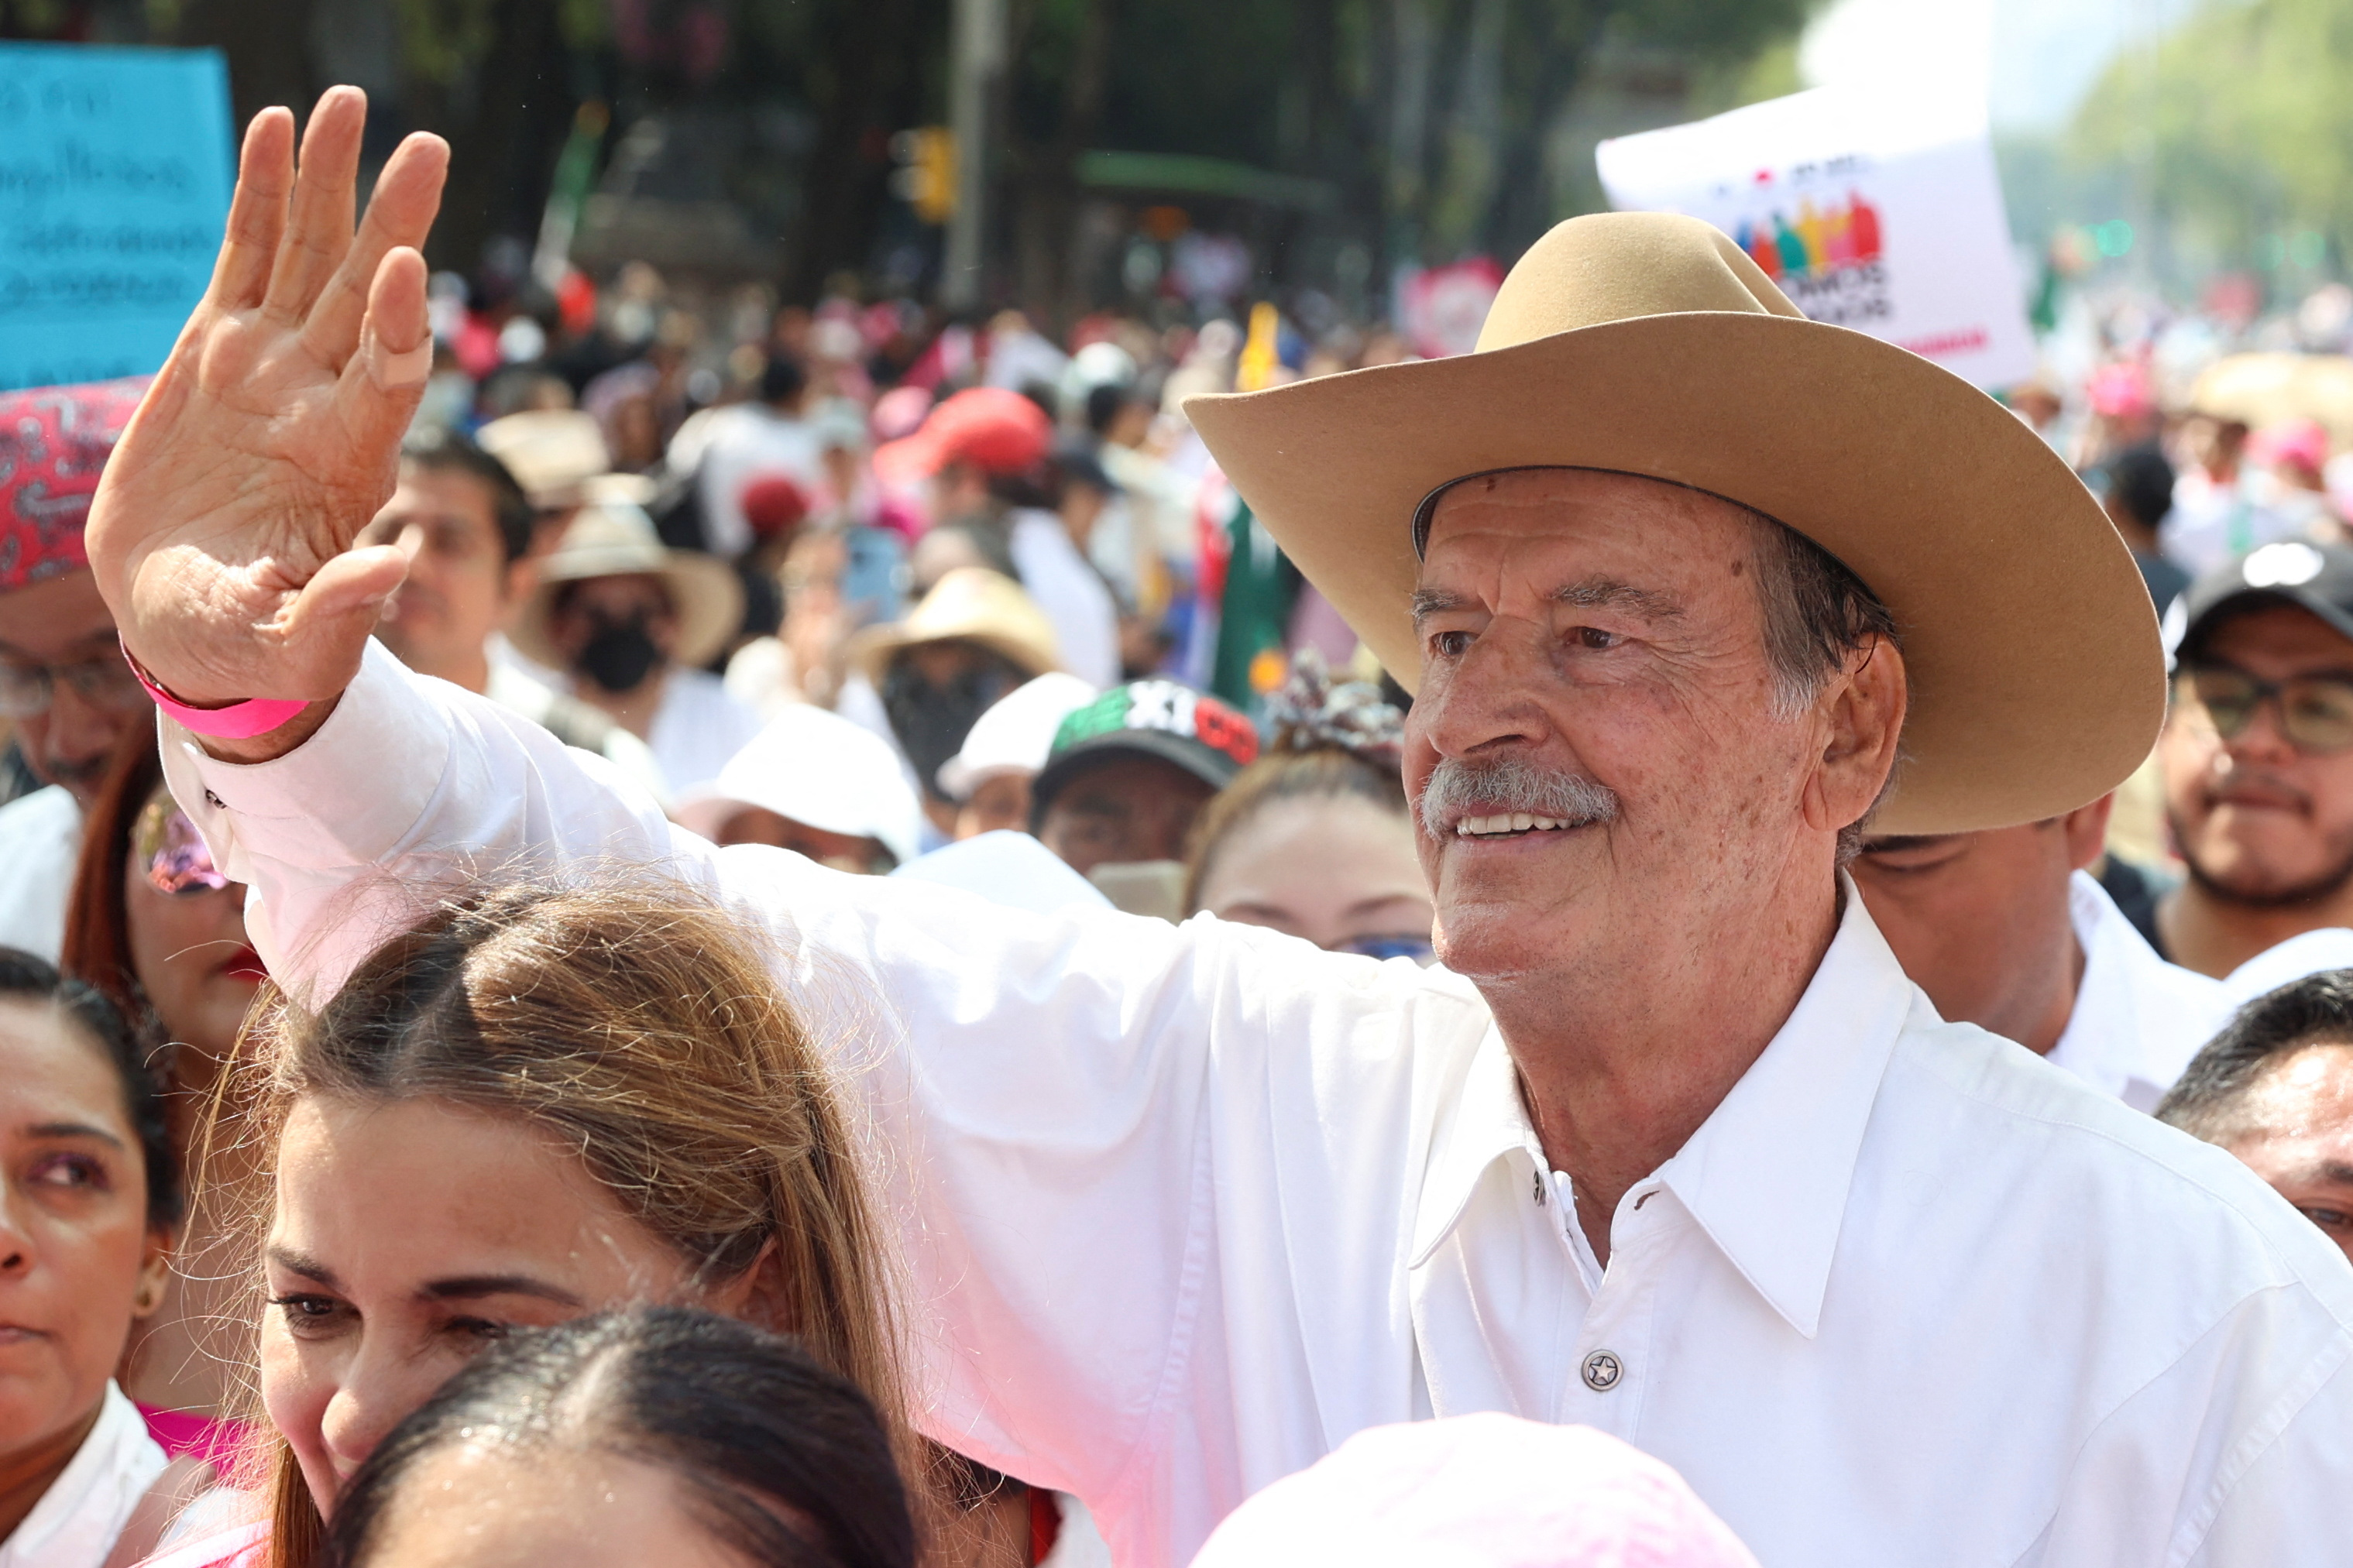 Former President Vicente Fox Quesada waves as demonstrators march against the electoral reform proposed by Mexican President Andres Manuel Lopez Obrador and in support of the National Electoral Institute (INE) in Mexico City, Mexico, November 13, 2022. REUTERS/Luis Cortes